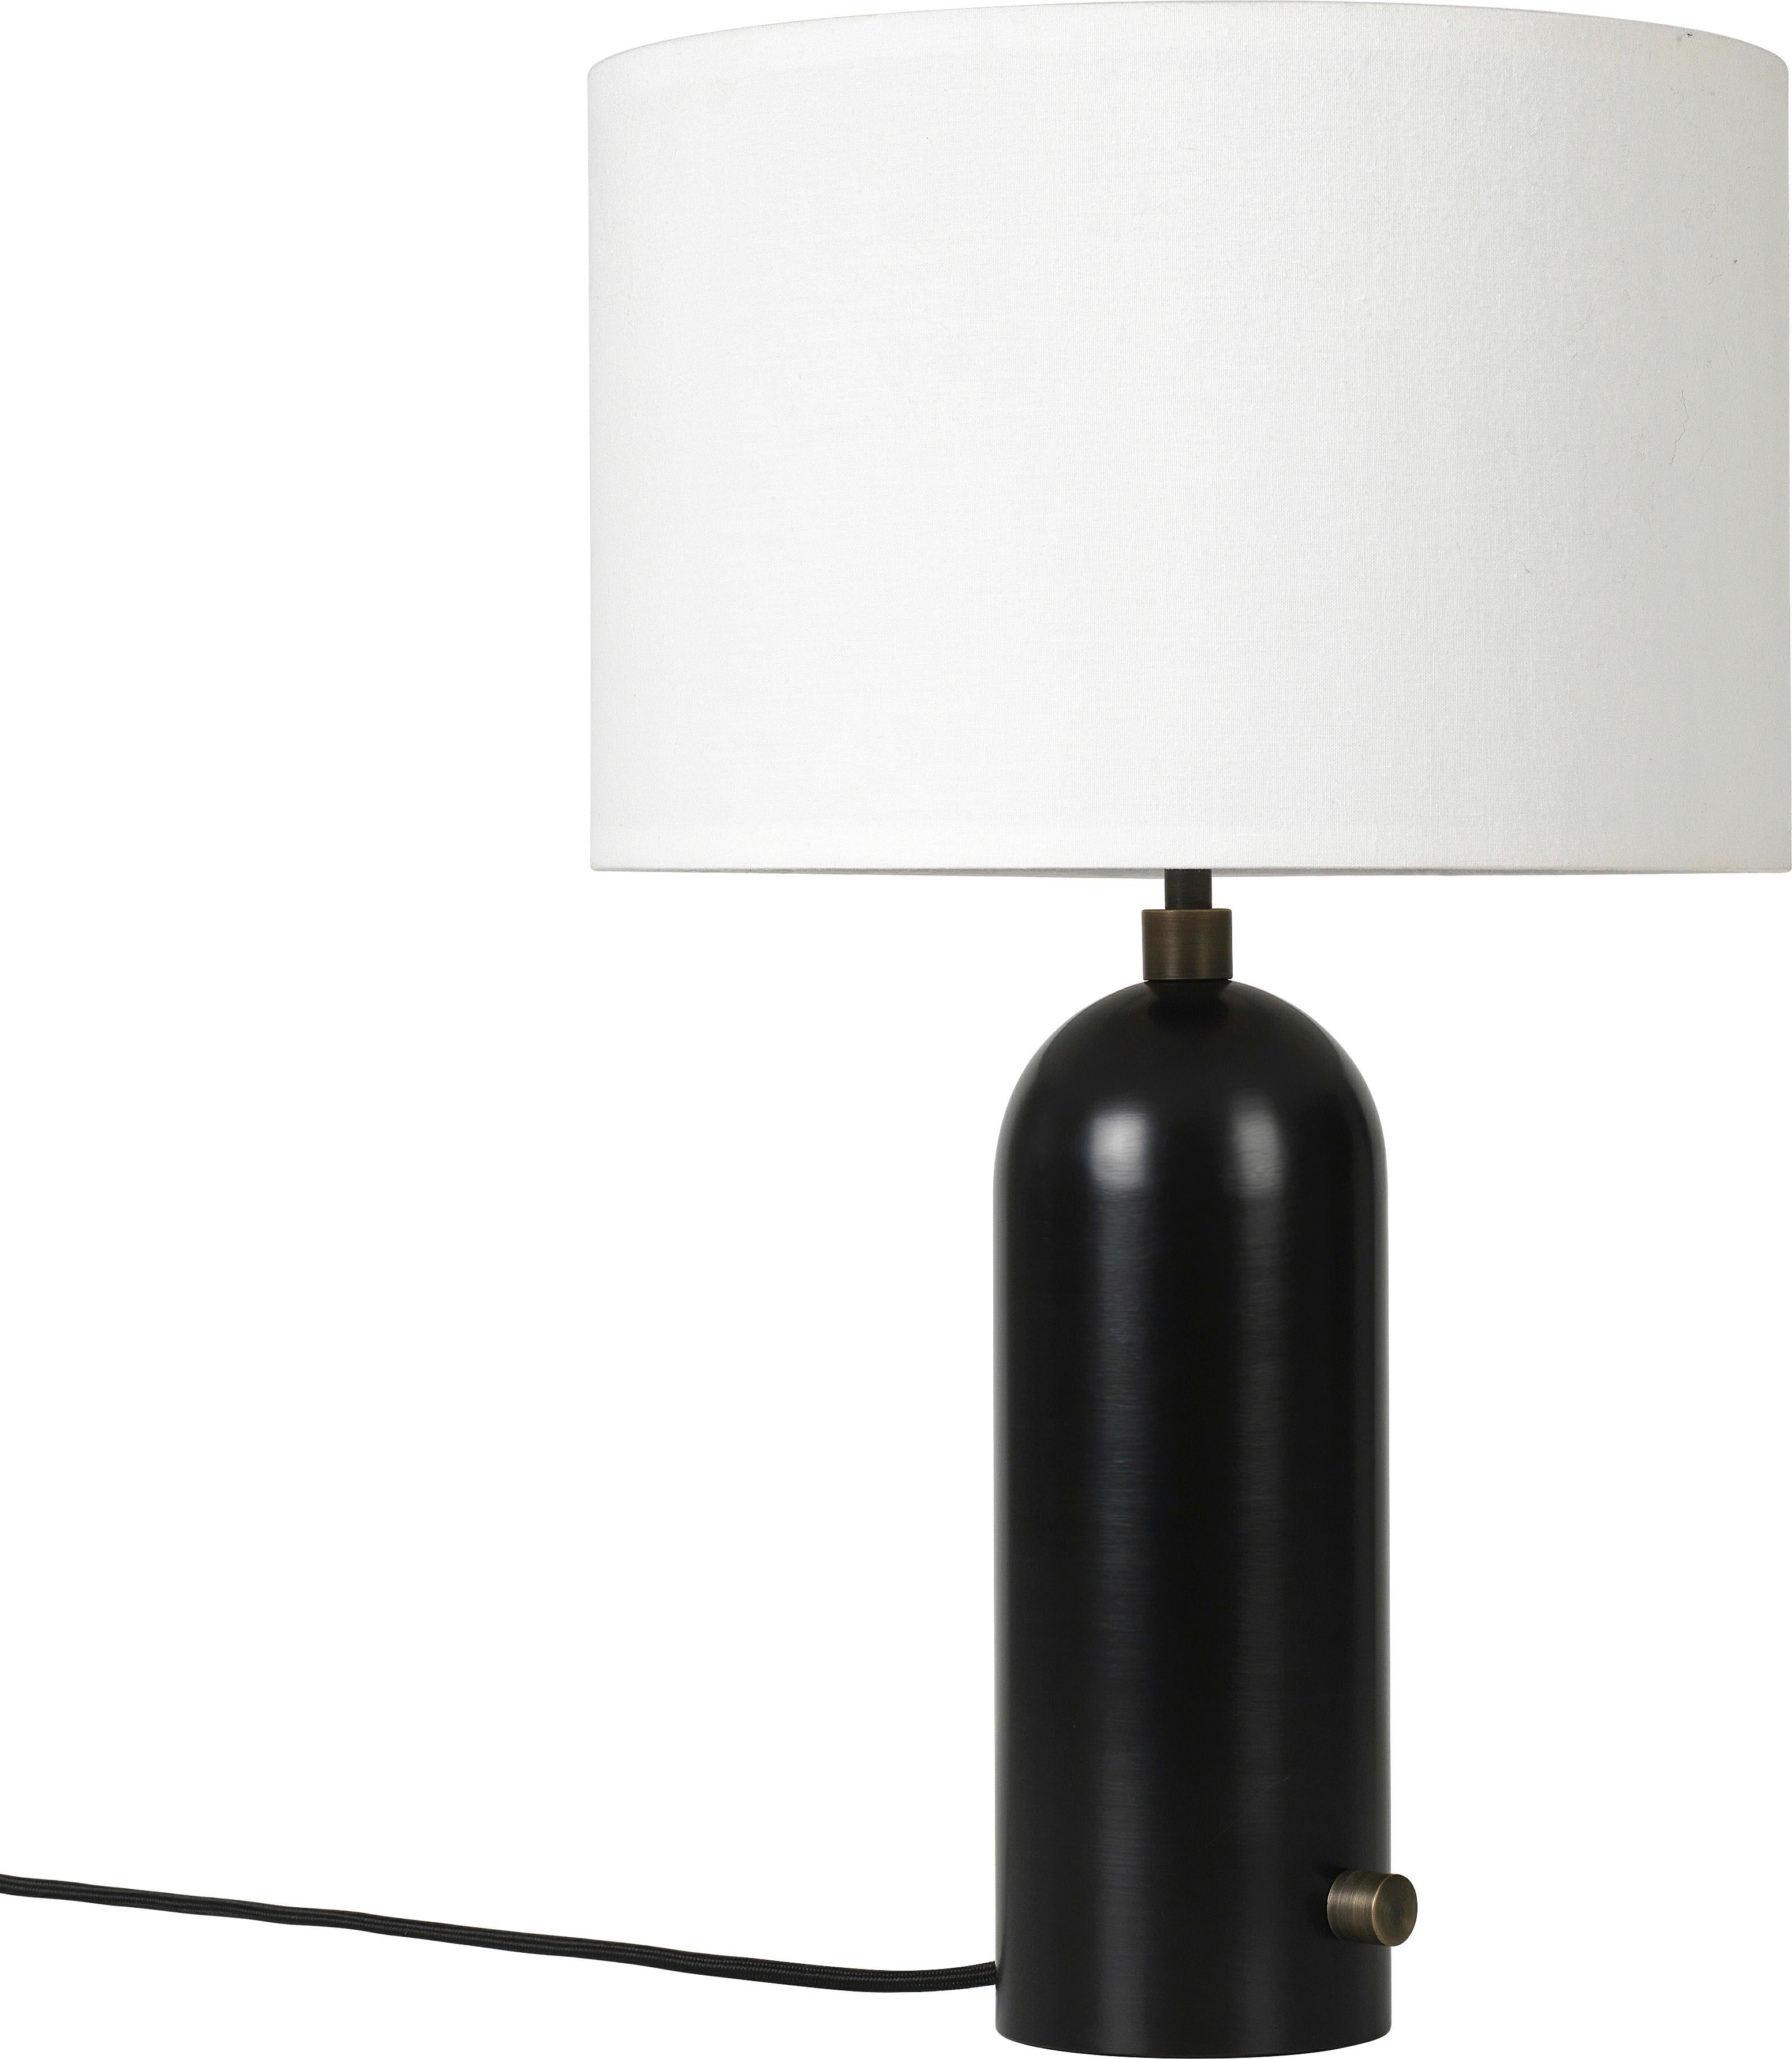 Small 'Gravity' Blackened steel table lamp by Space Copenhagen for Gubi.

Executed in blackened steel with a canvas or white textile shade perched atop its stem, the Gravity table lamp designed by Space Copenhagen for GUBI contrasts strength and